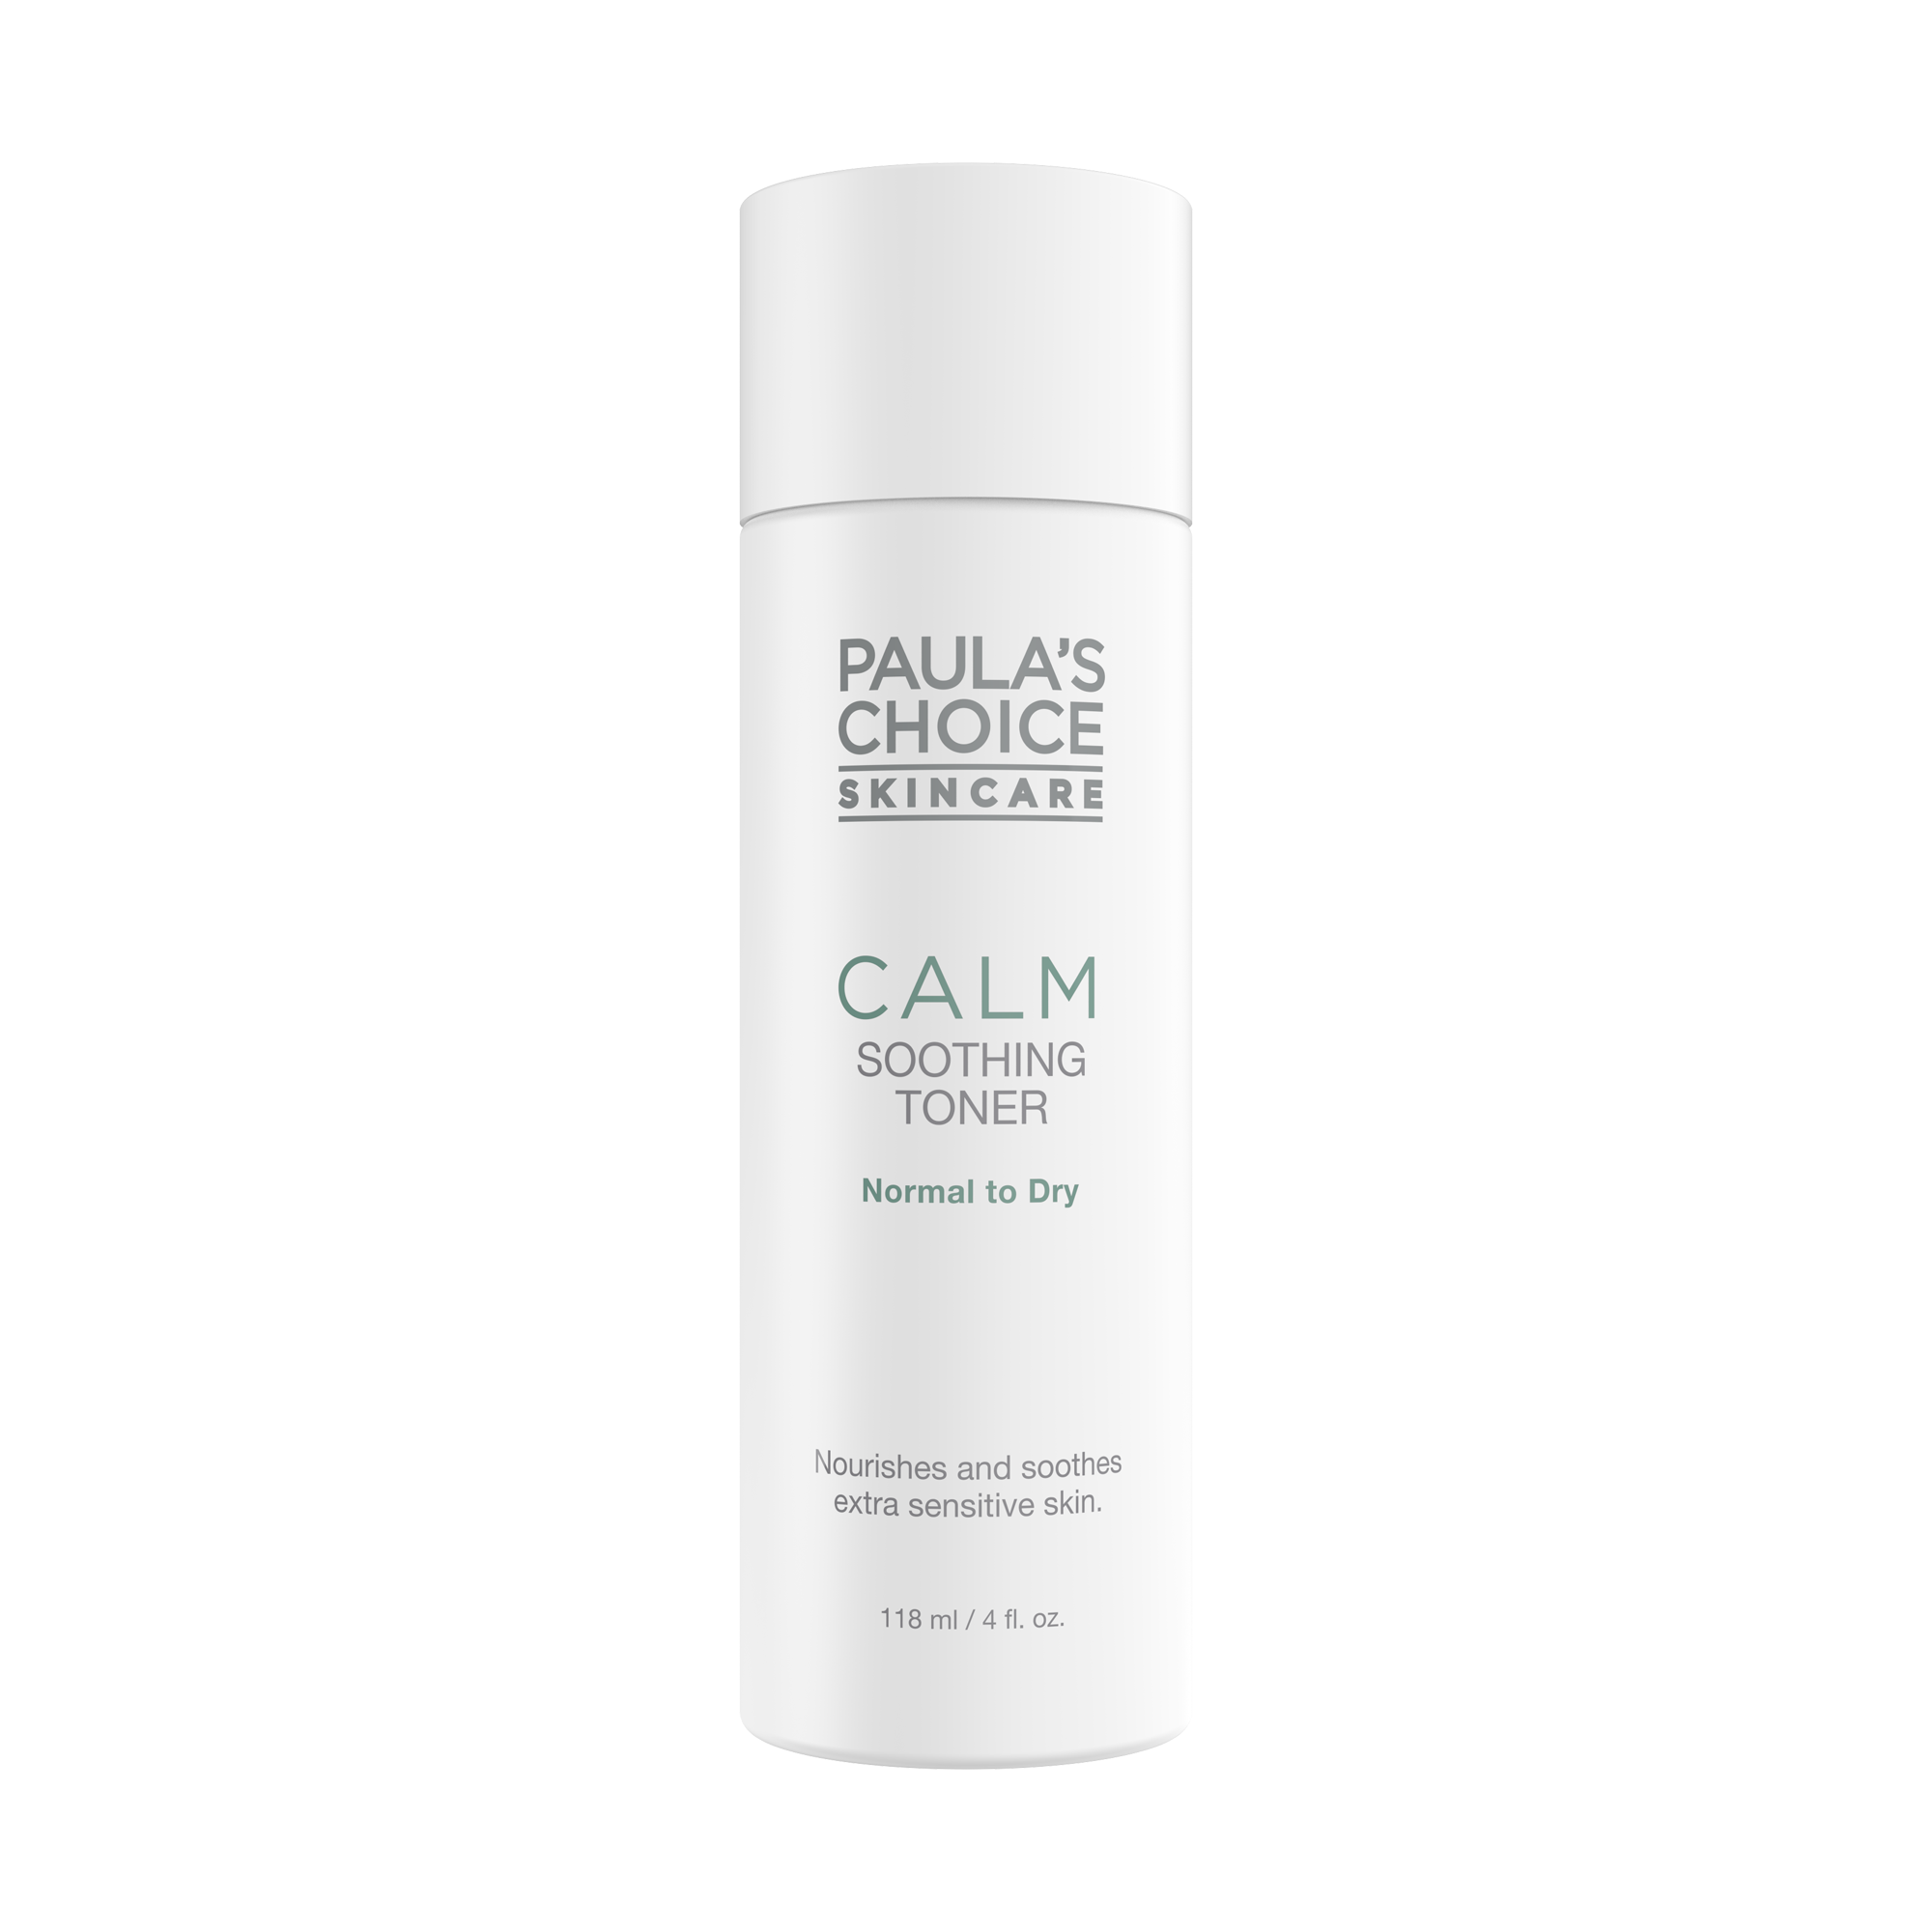 CALM Redness Relief Toner for Normal to Dry Skin | Paula's Choice